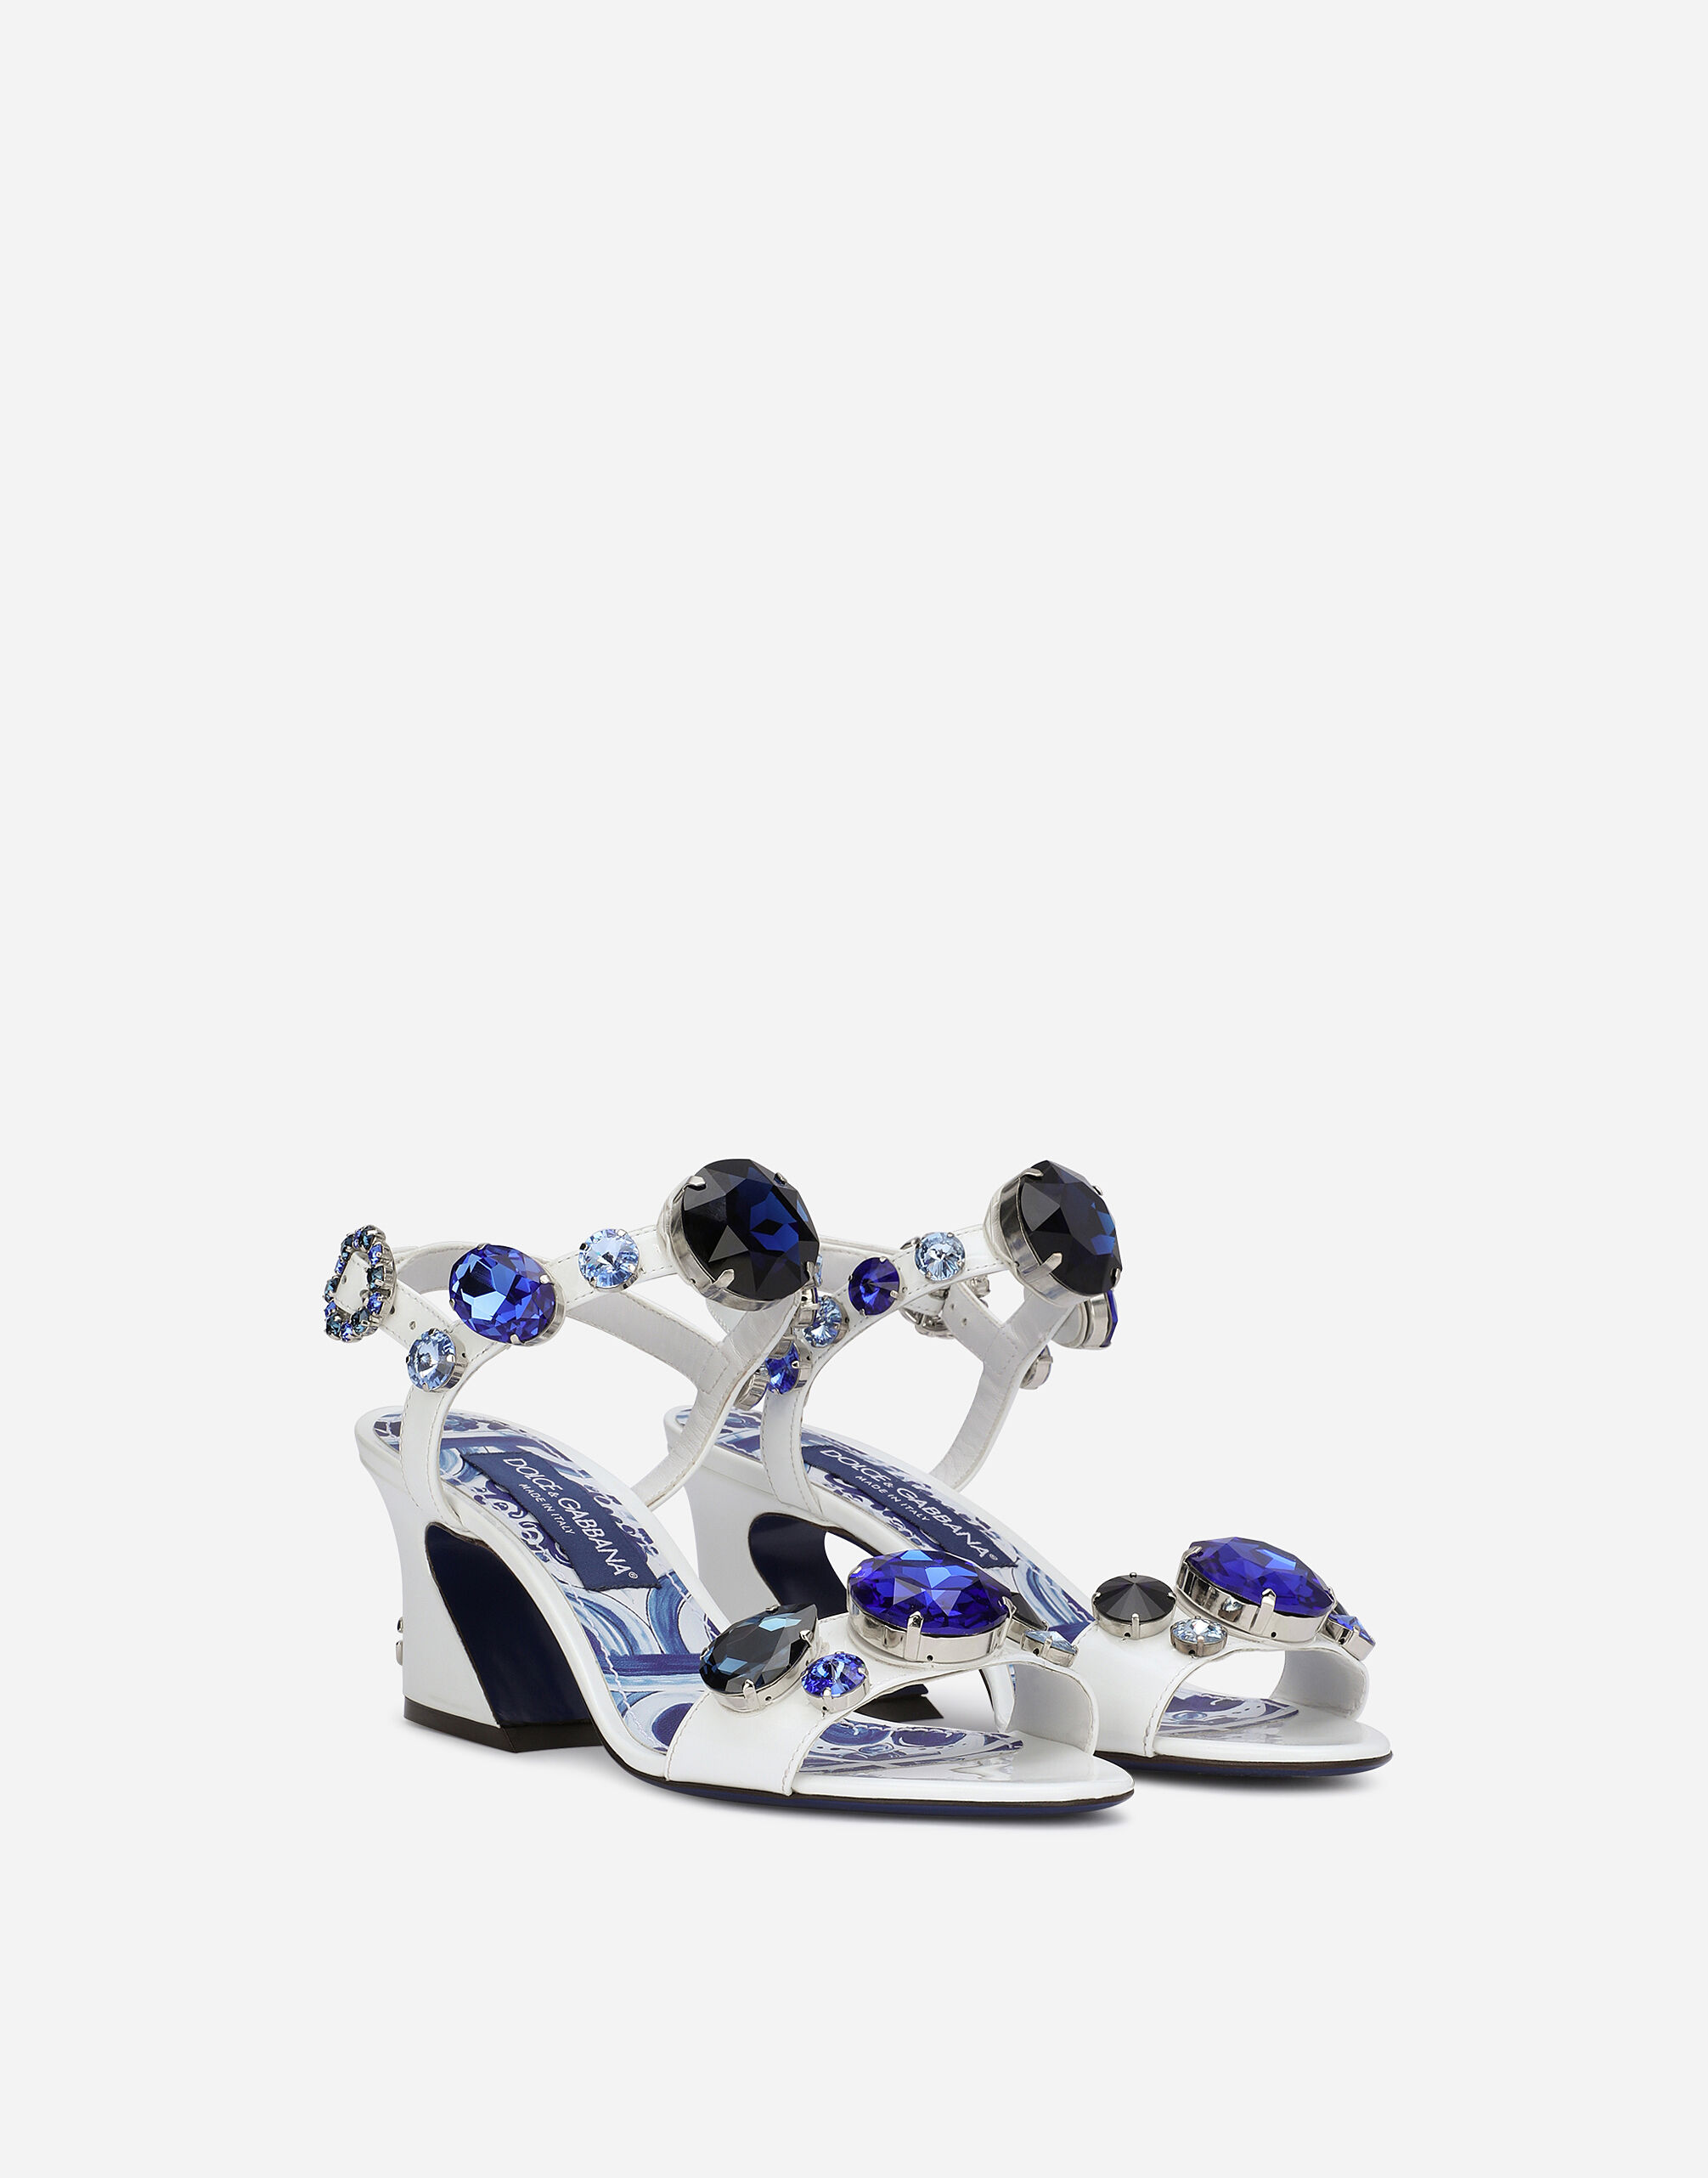 Patent leather sandals with embellishment